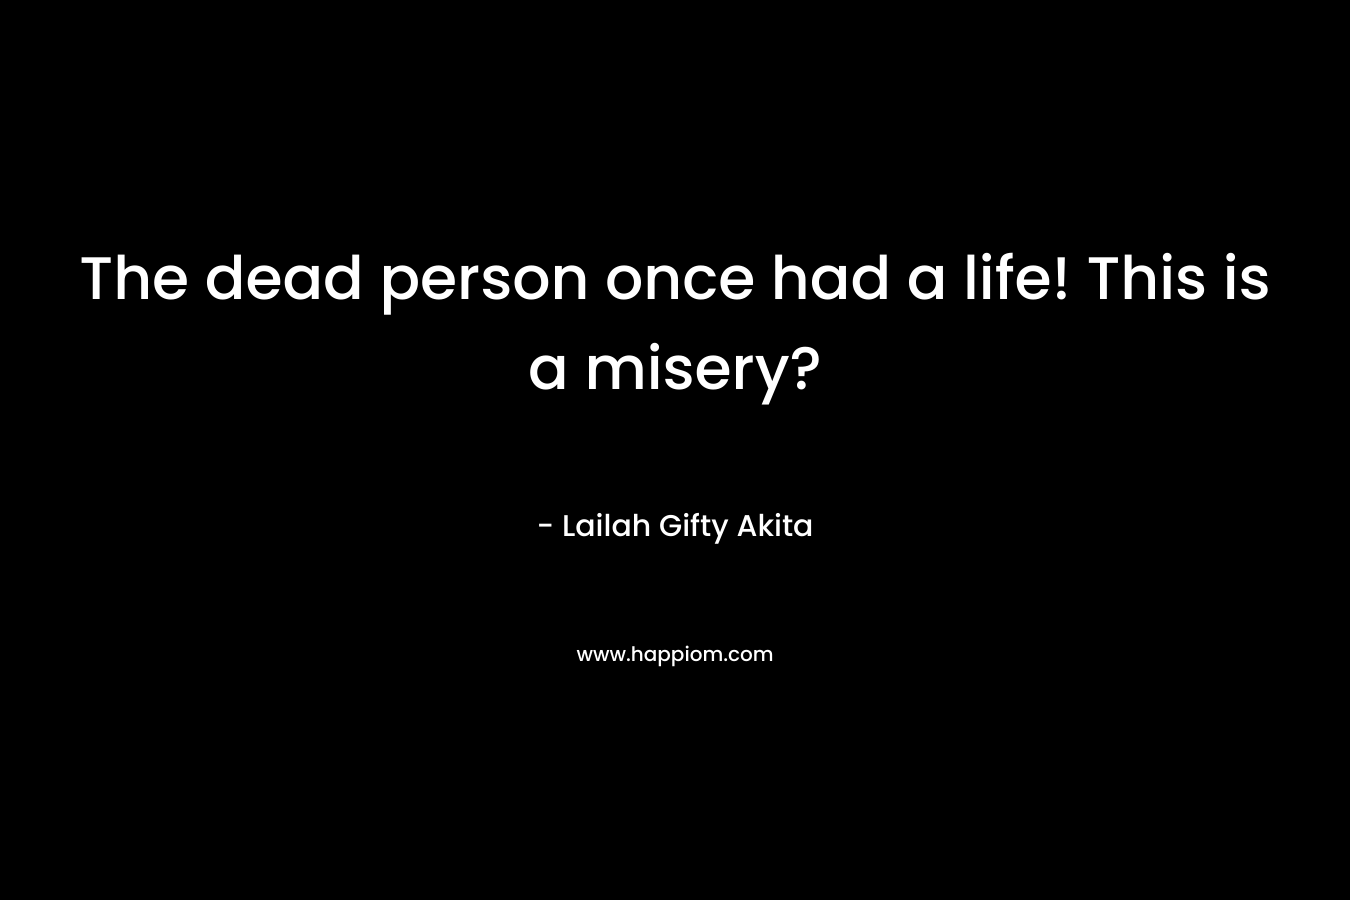 The dead person once had a life! This is a misery?